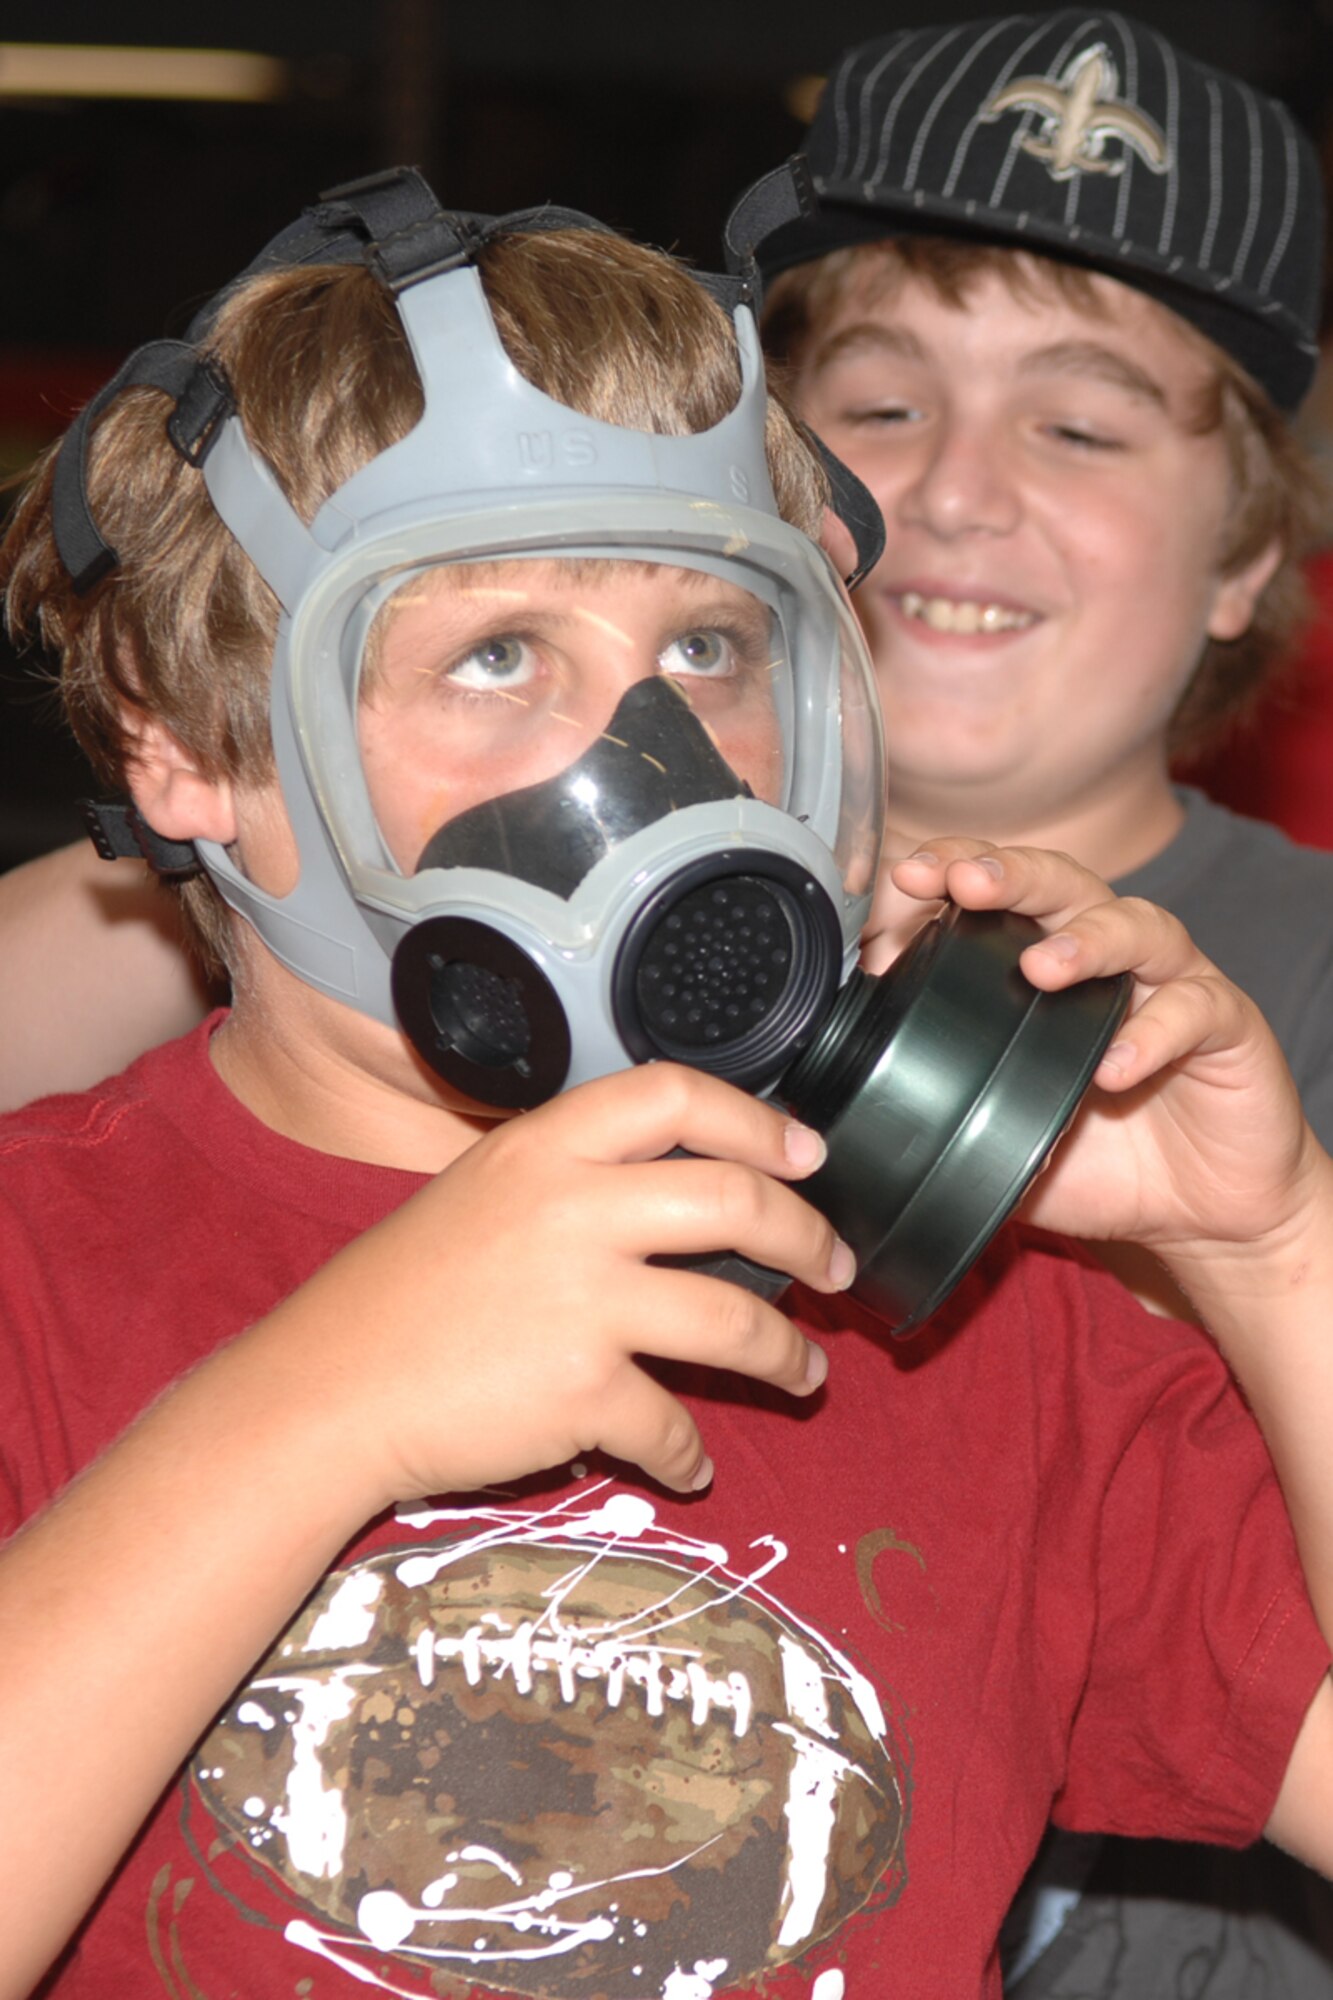 Joseph Dunn tries on a gas mask at the Hurlburt Field Deployment Control Center during the Air Force Adventure Camp July 16. The camp allows military children to see some of the deployment processes their parents experience. (U.S. Air Force photo/Airman 1st Class Kimberly Darnall)
